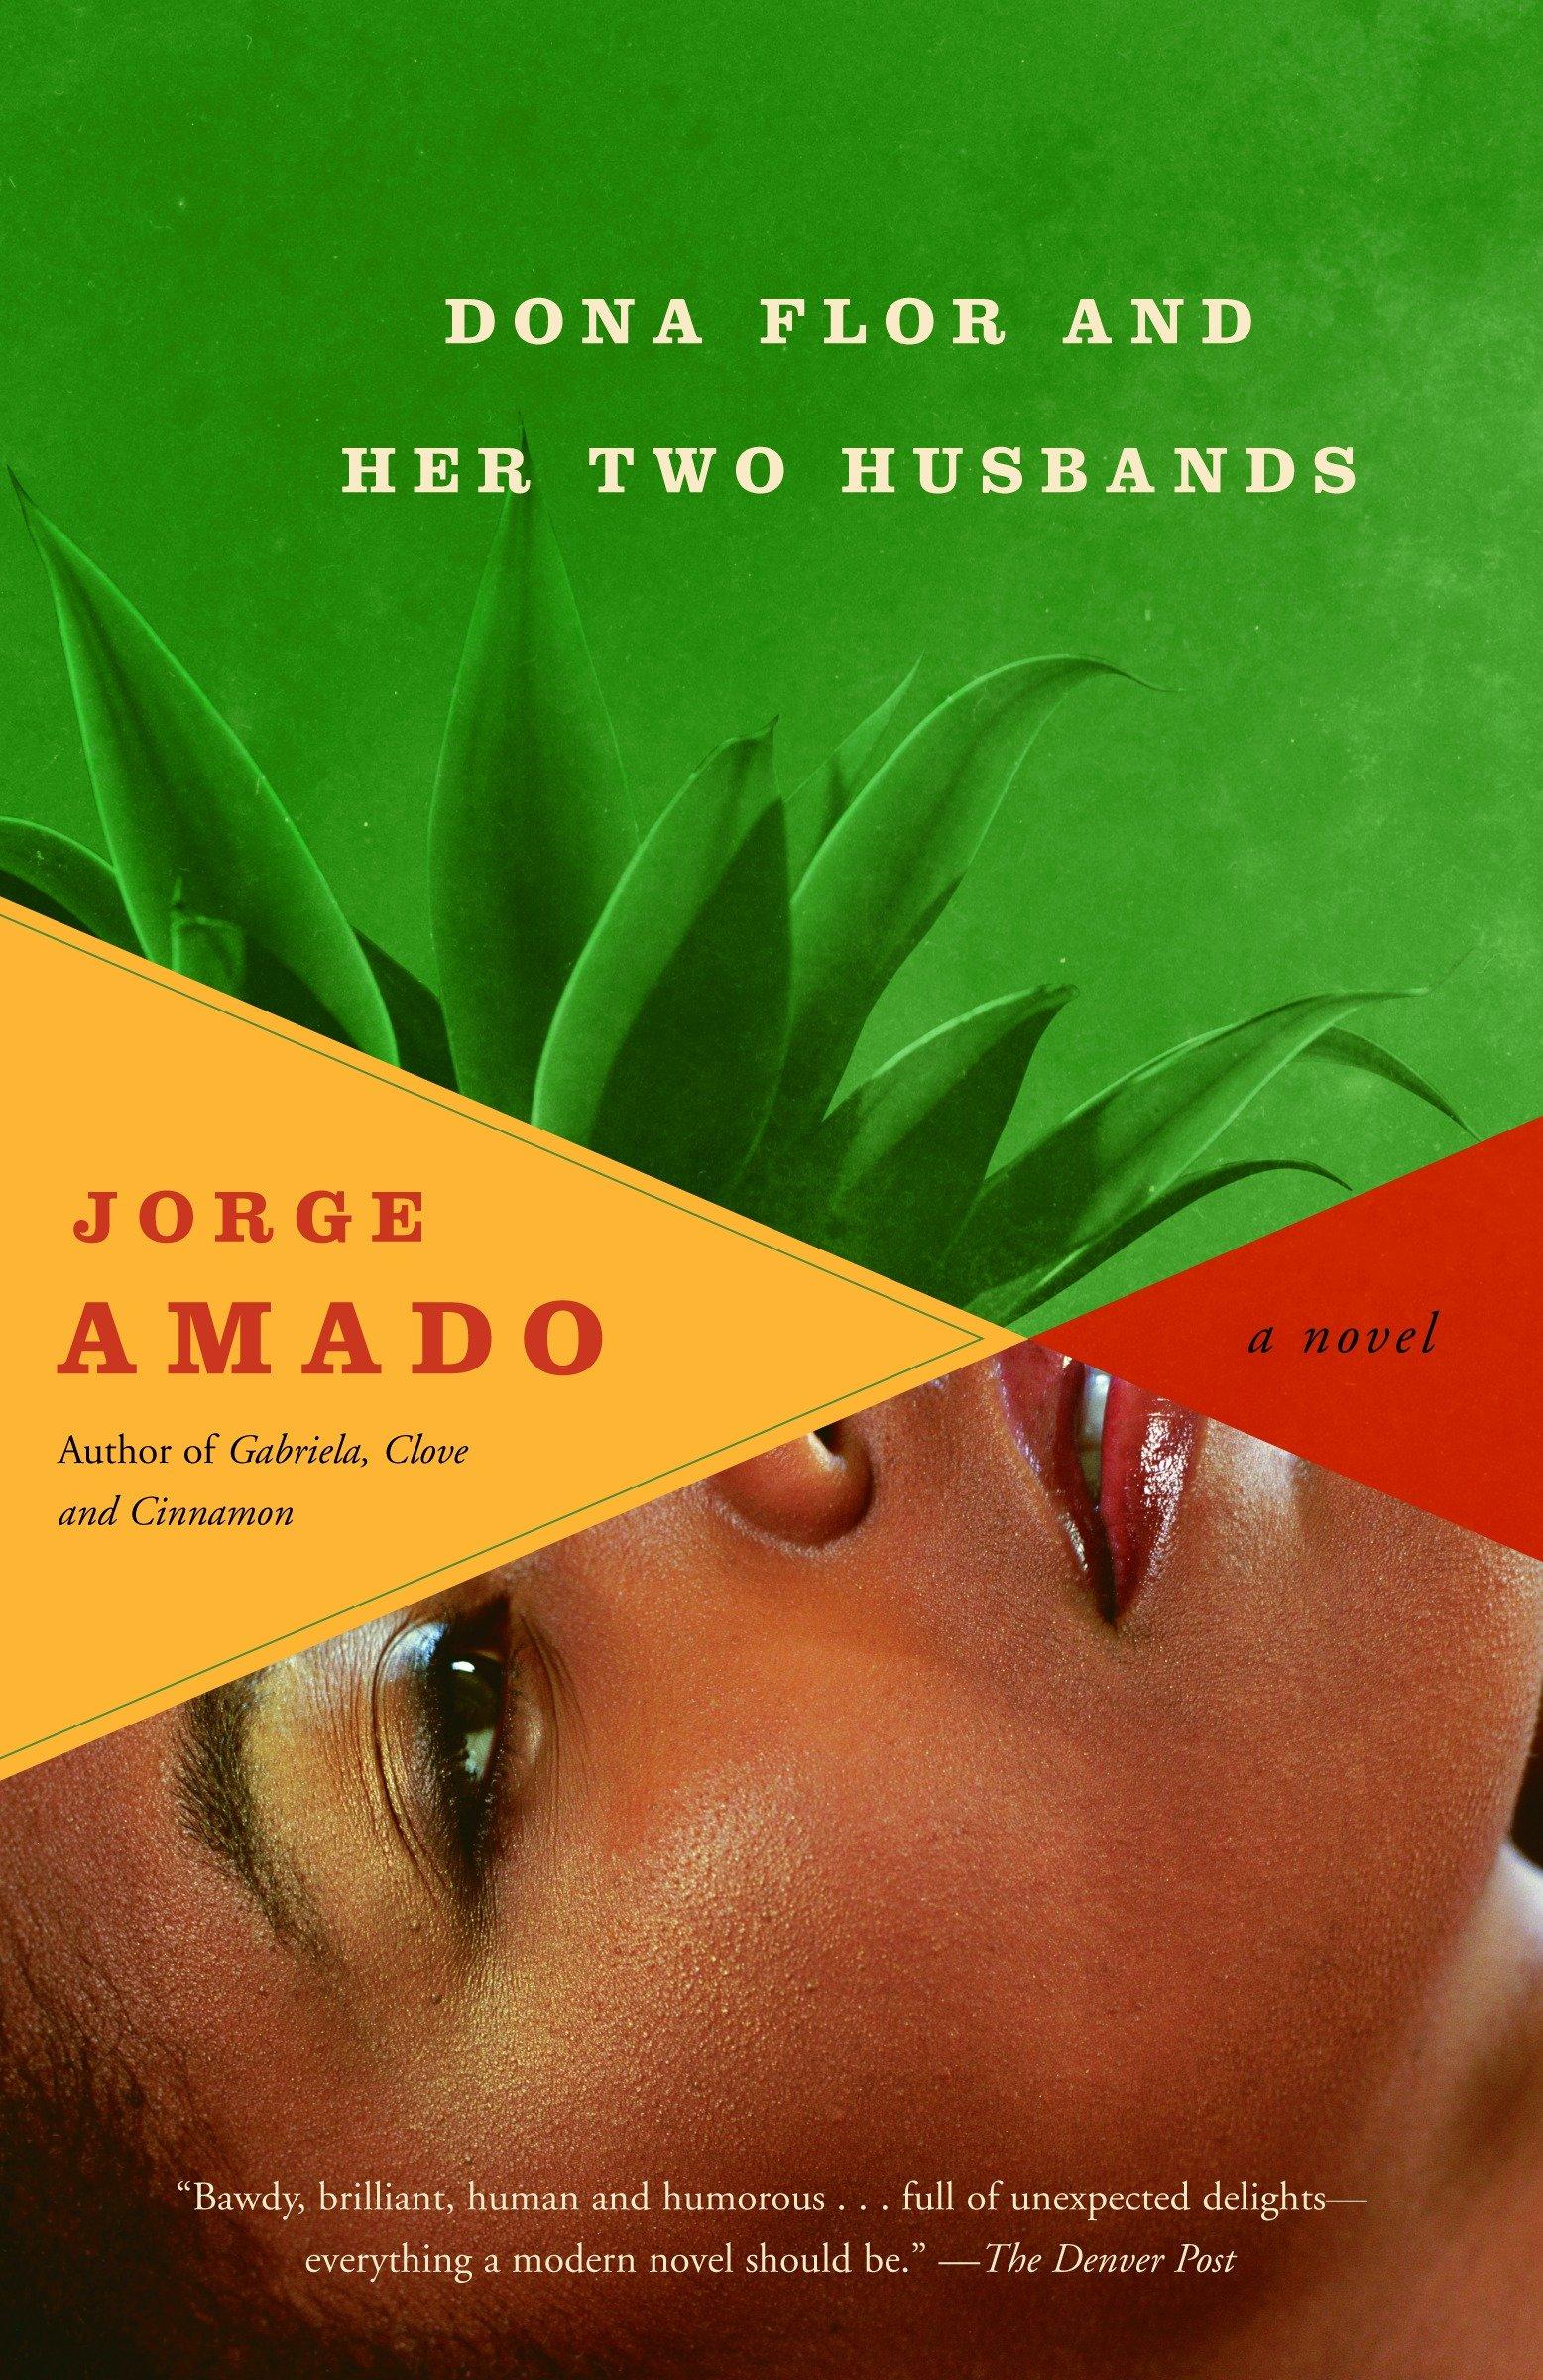 Dona Flor and Her Two Husbands / Jorge Amado / Taschenbuch / Englisch / 2006 / Knopf Doubleday Publishing Group / EAN 9780307276643 - Amado, Jorge